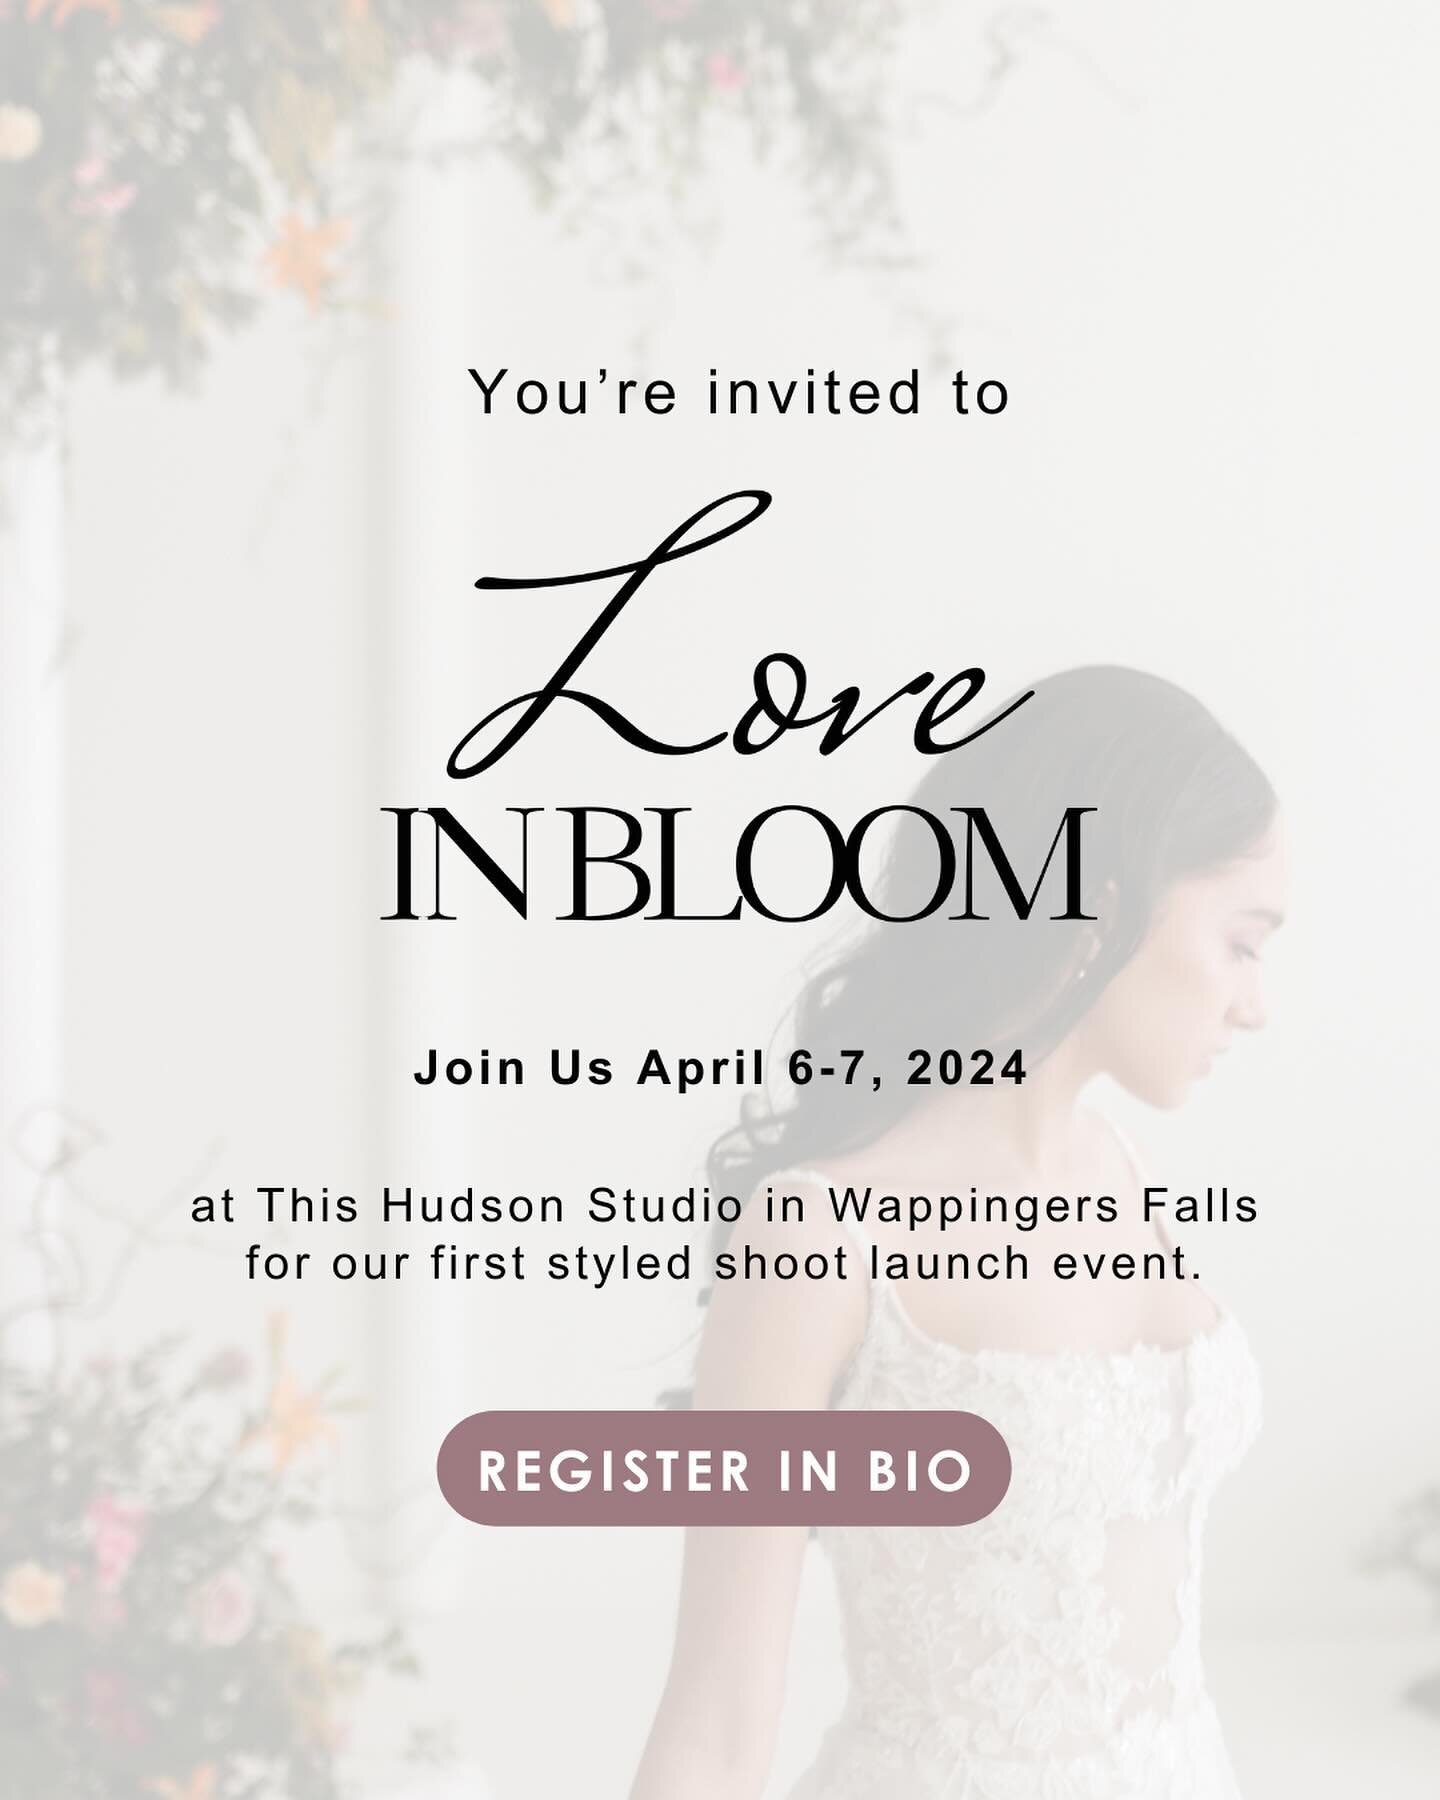 Hey you, yes YOU. The wedding photographer, videographer, or content creator CRAVING opportunities to create unique content,

This event was created with you in mind. There will be up to 9 vignettes for you to capture, including:

🌷 Tablescape
🌷 Lo